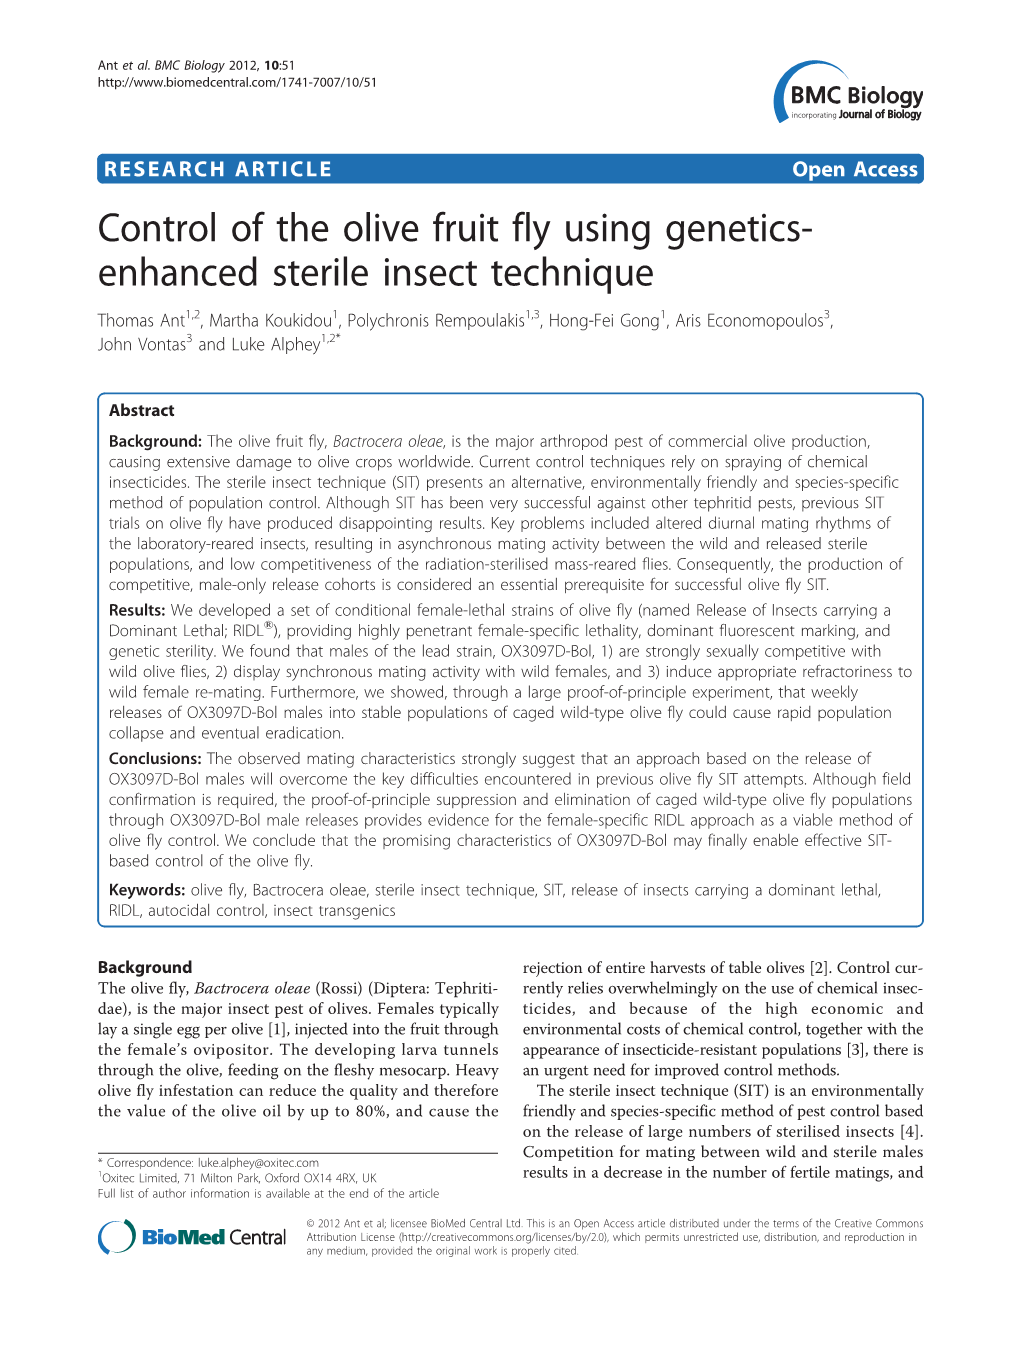 Control of the Olive Fruit Fly Using Genetics- Enhanced Sterile Insect